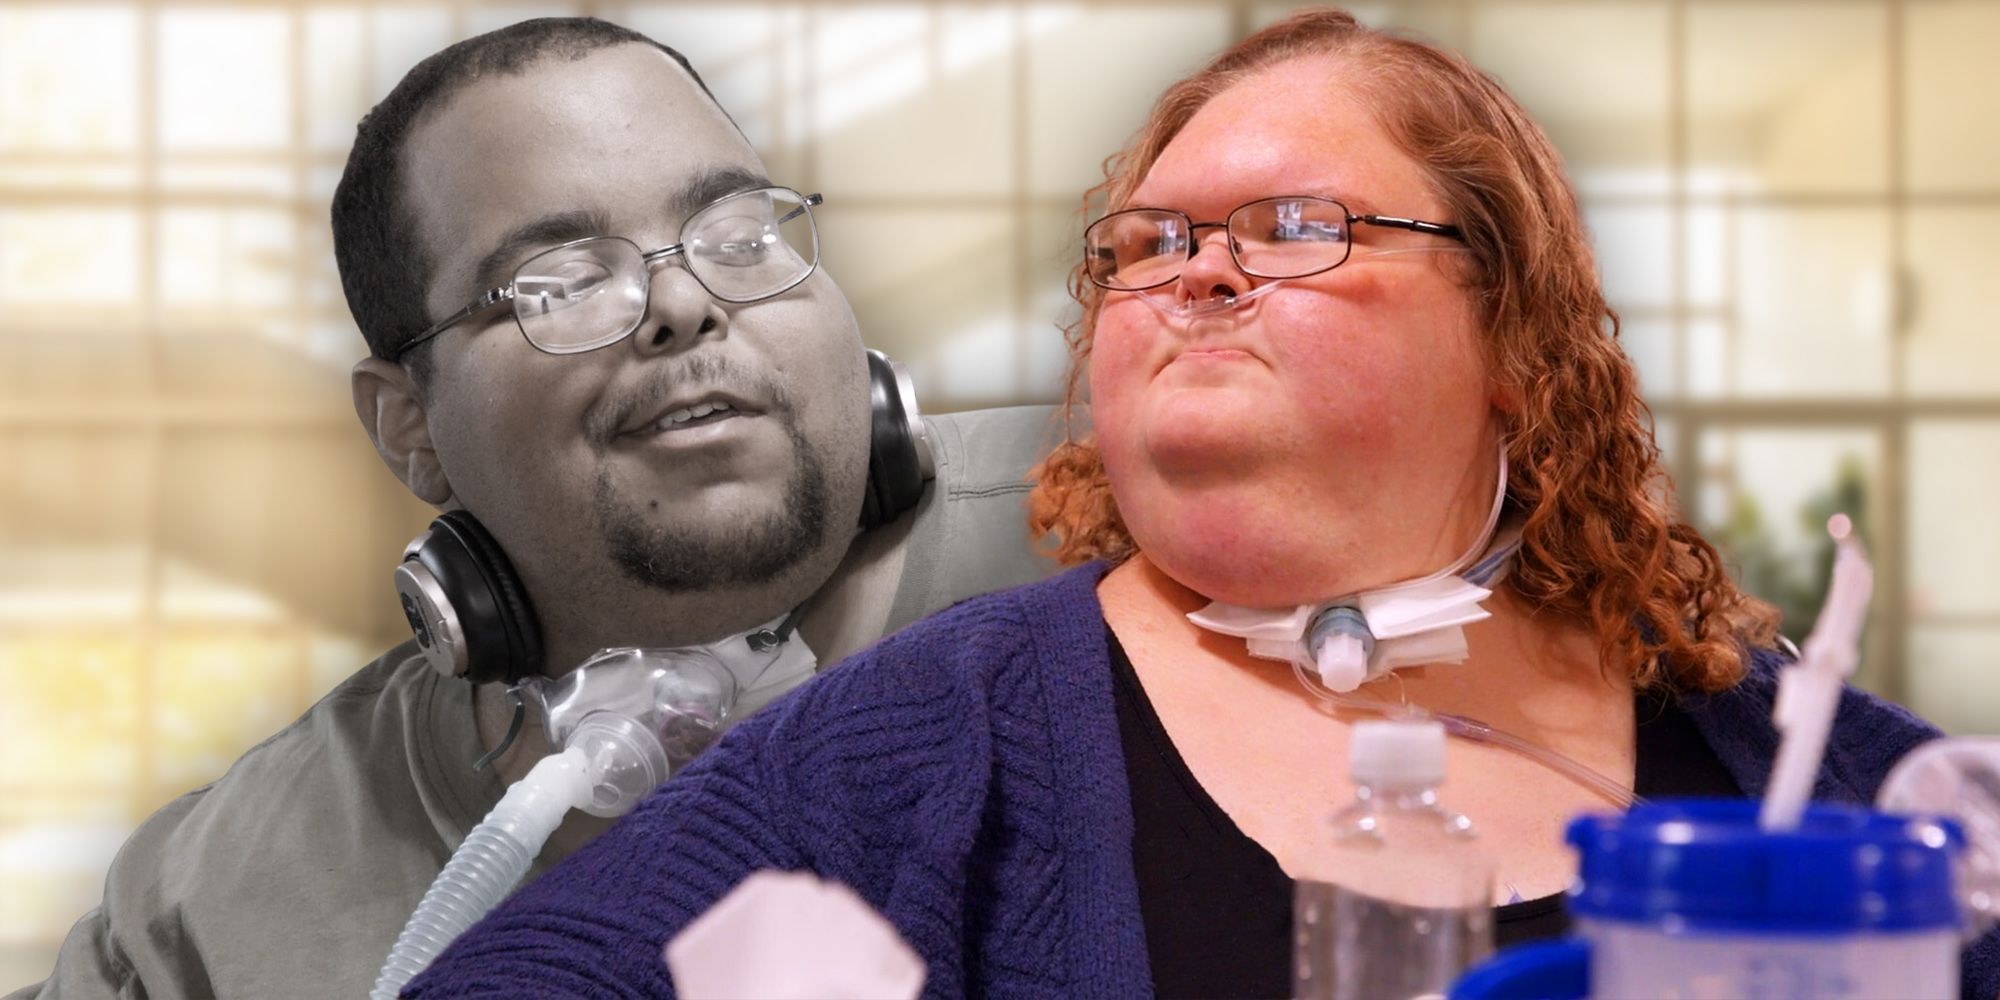 Tammy Slaton and Caleb from 1000-lb Sisters